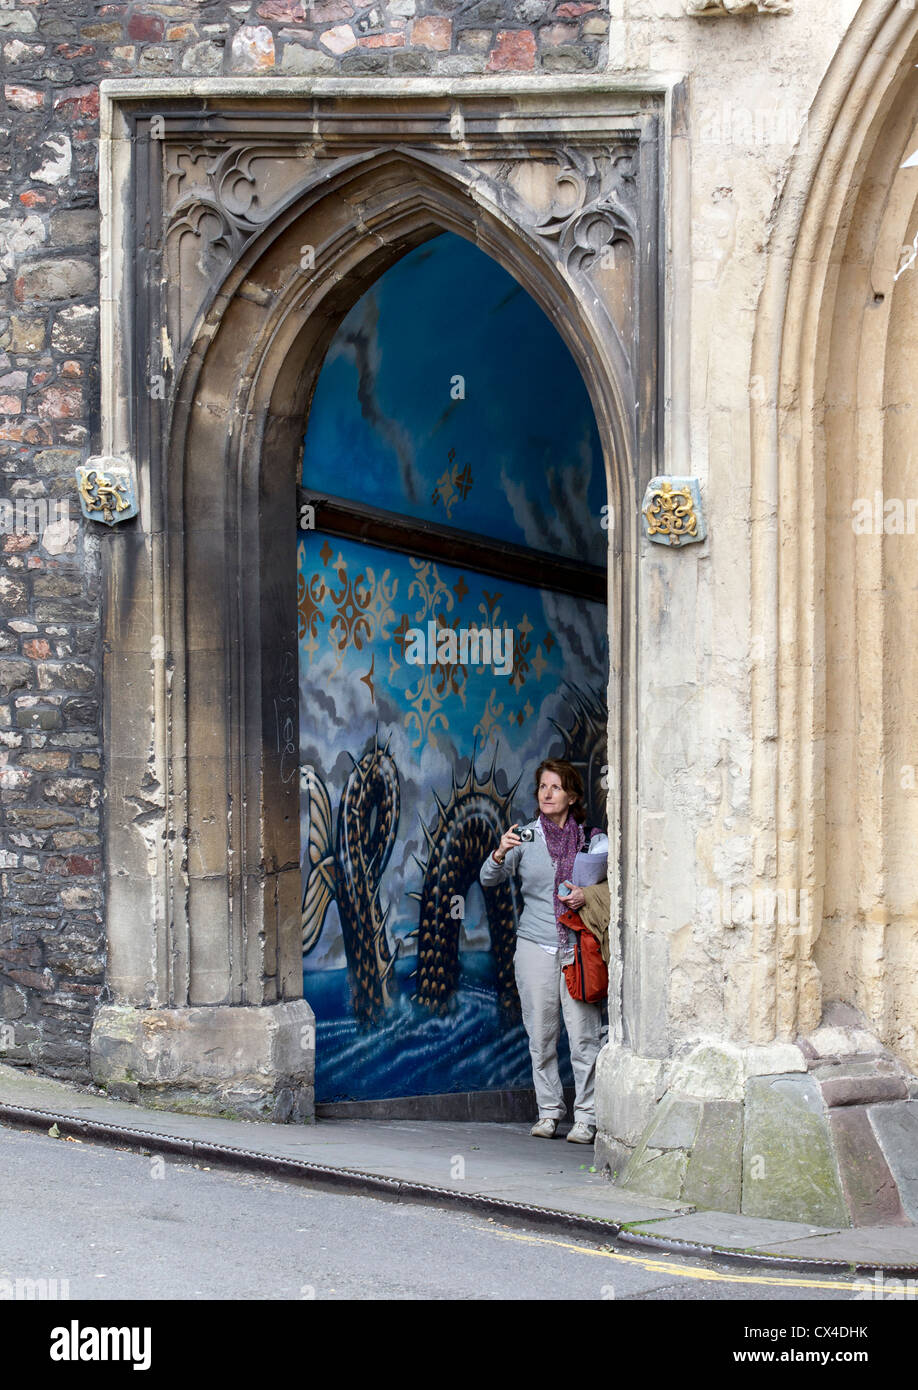 A woman with a camera standing in front of a mural depicting fantastical and mythical creatures at St. John's Gate in Bristol Stock Photo